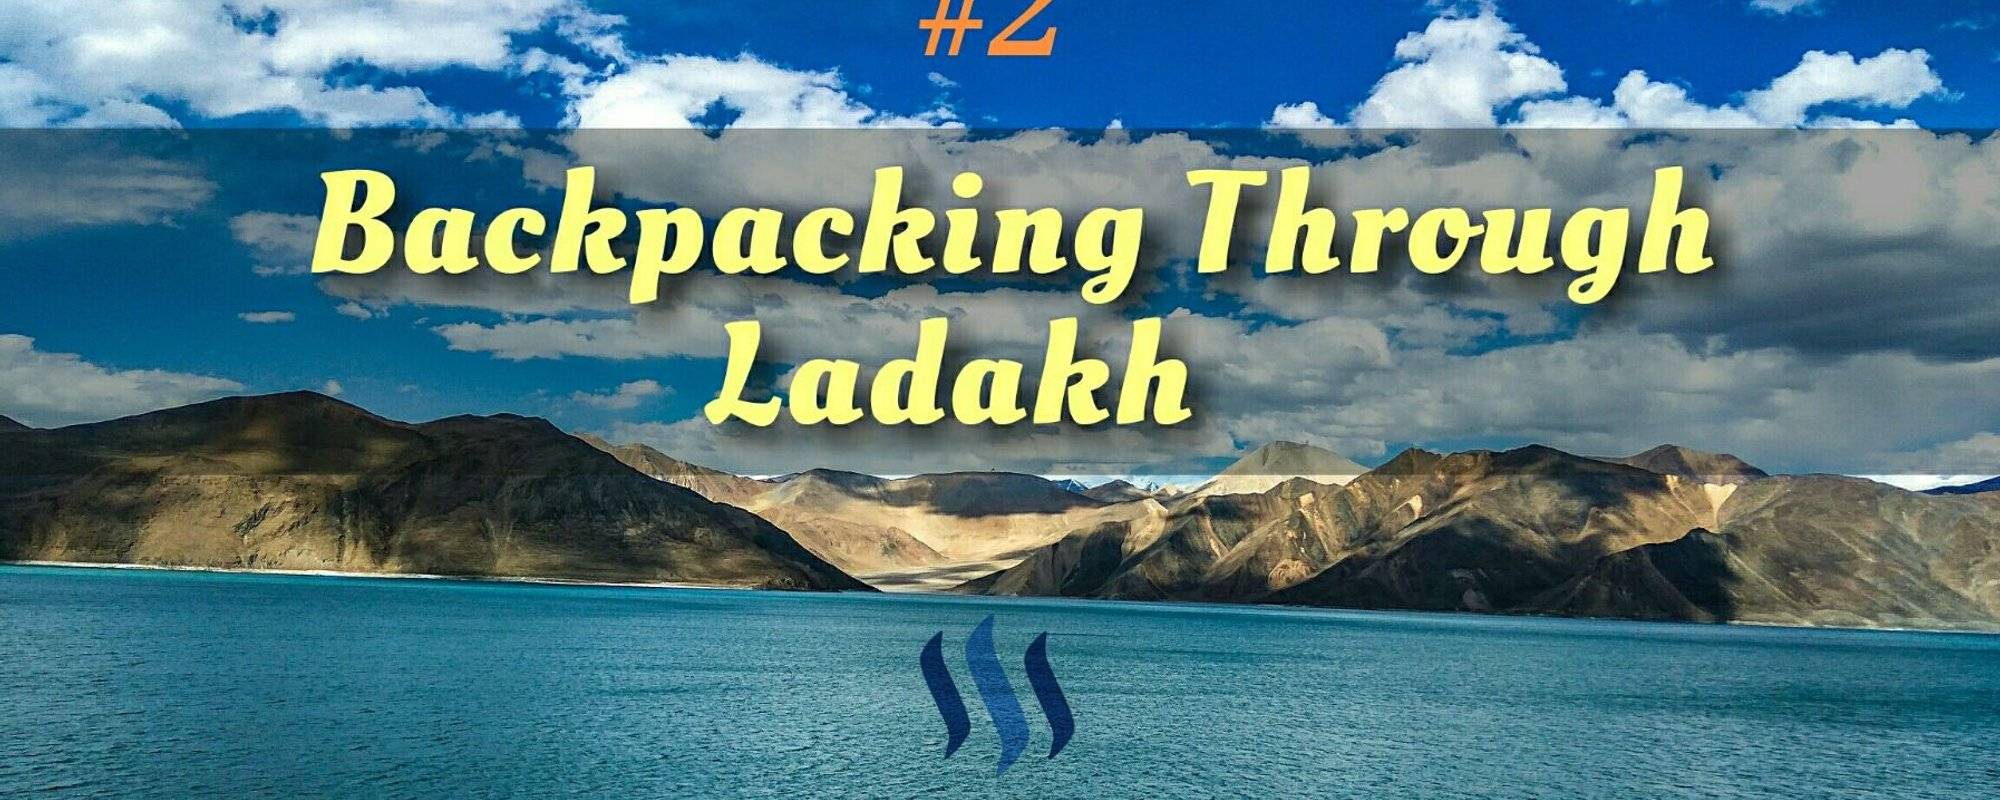 #2 Backpacking Through The High Altitude Deserts of Ladakh - Road Trip to Pangong Lake